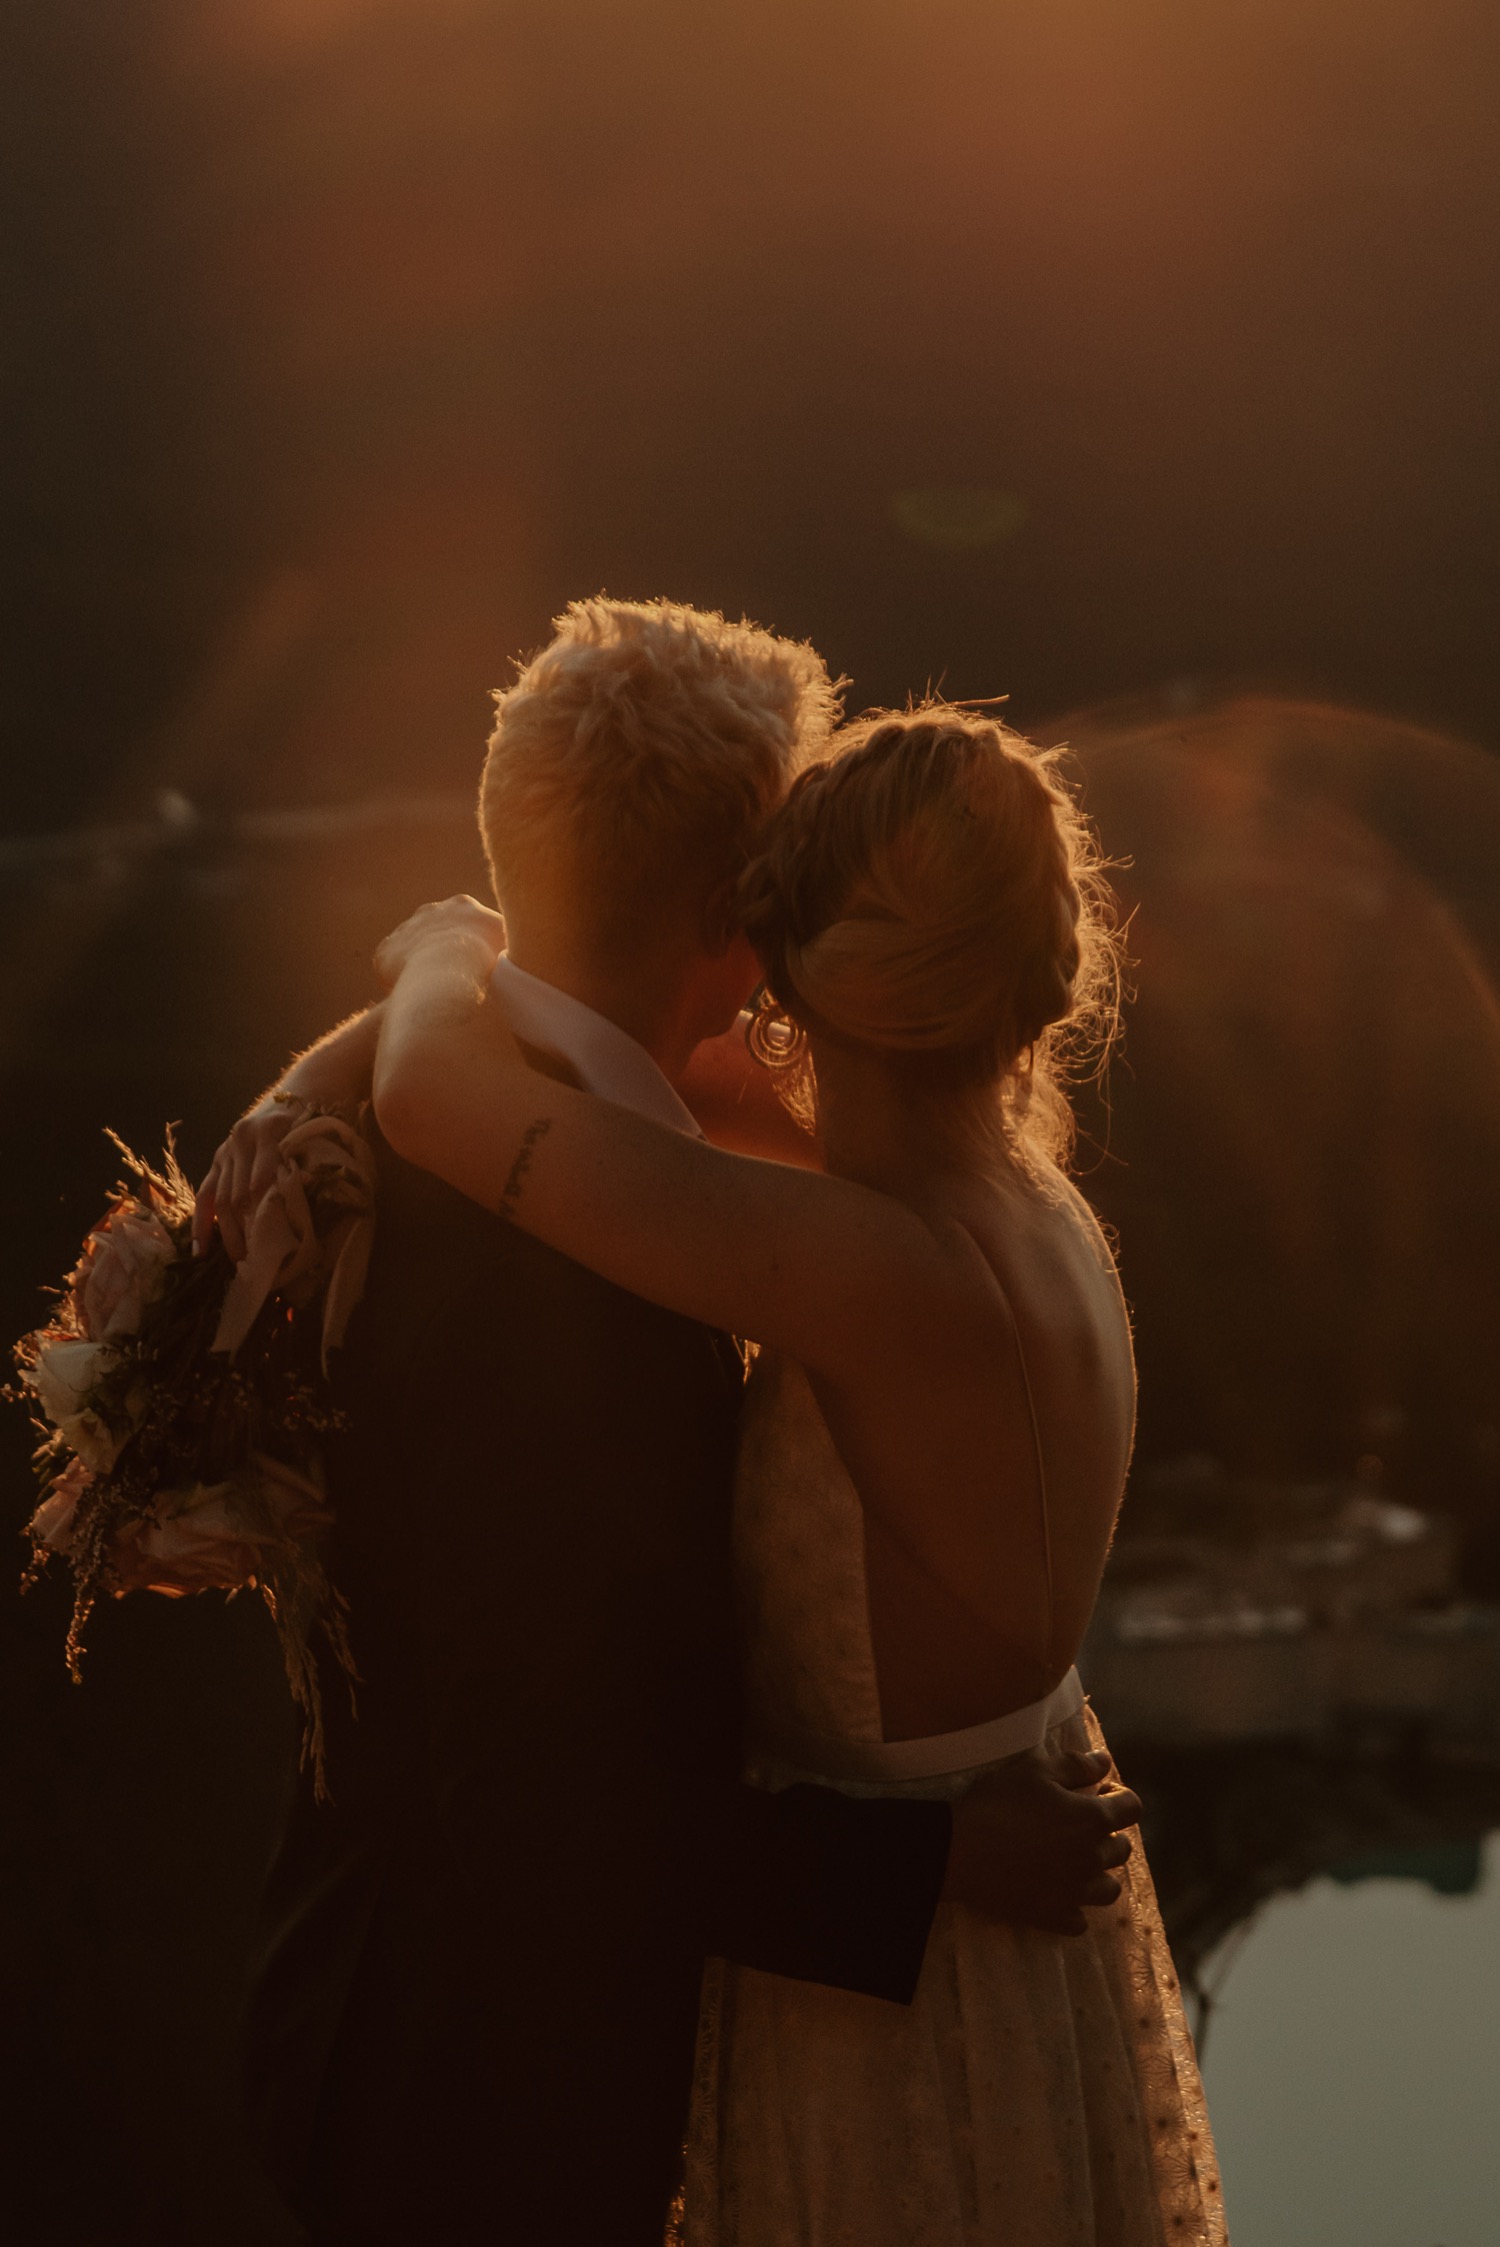 sun flare shot of couple embracing and kissing just as the sun rises above the mountain ridge during a hiking style elopement